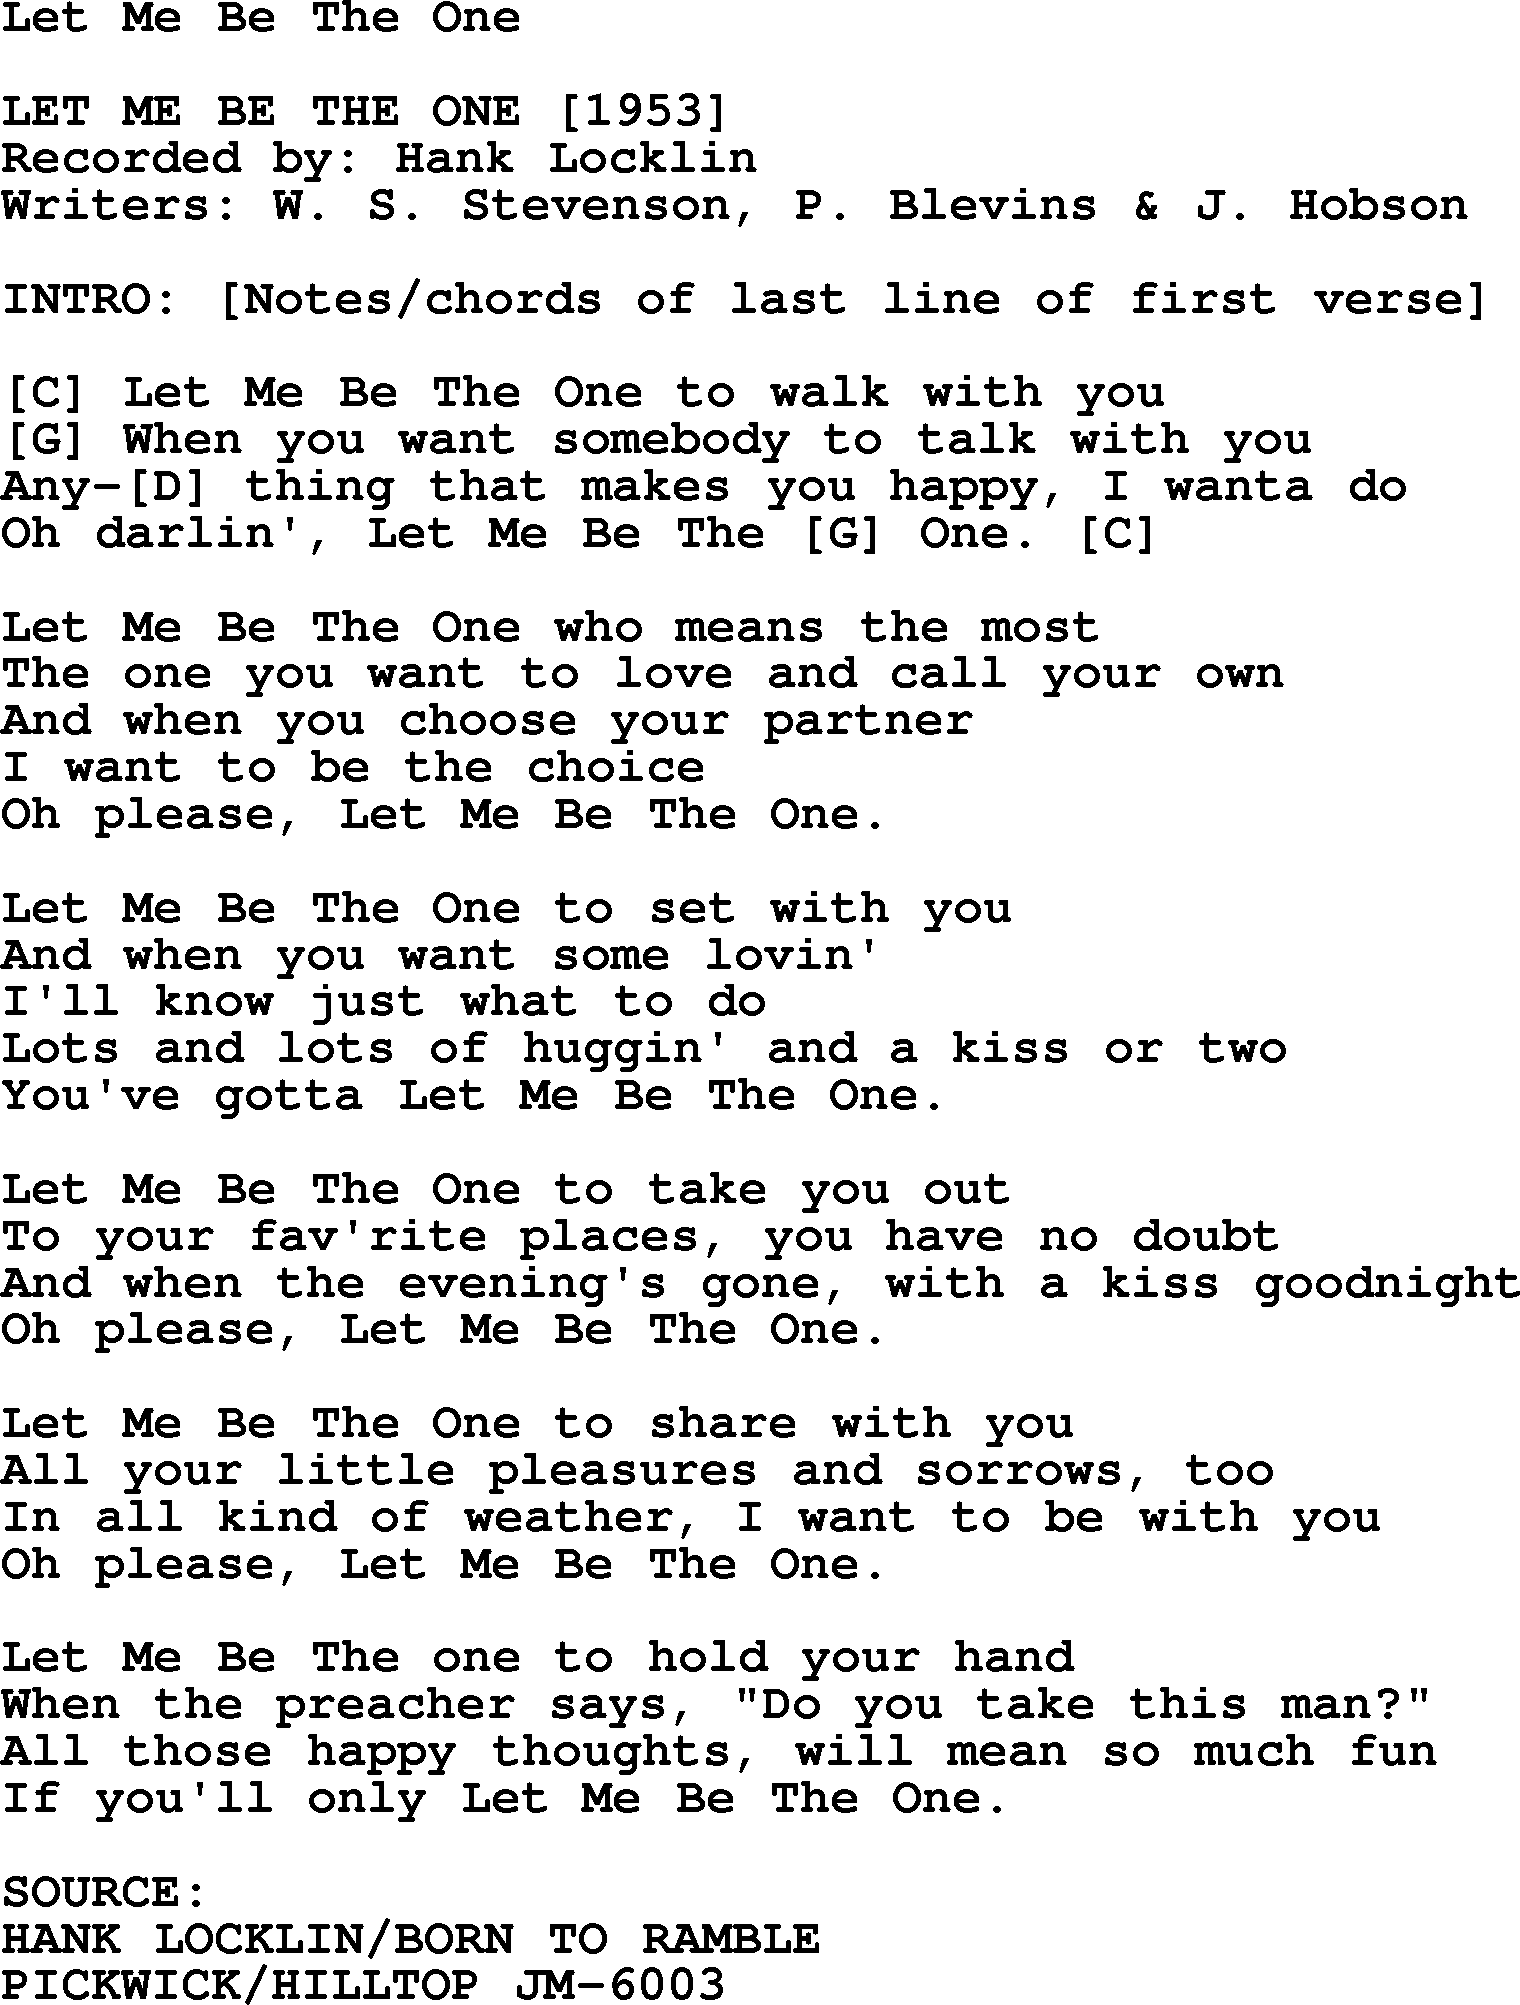 Bluegrass song: Let Me Be The One, lyrics and chords